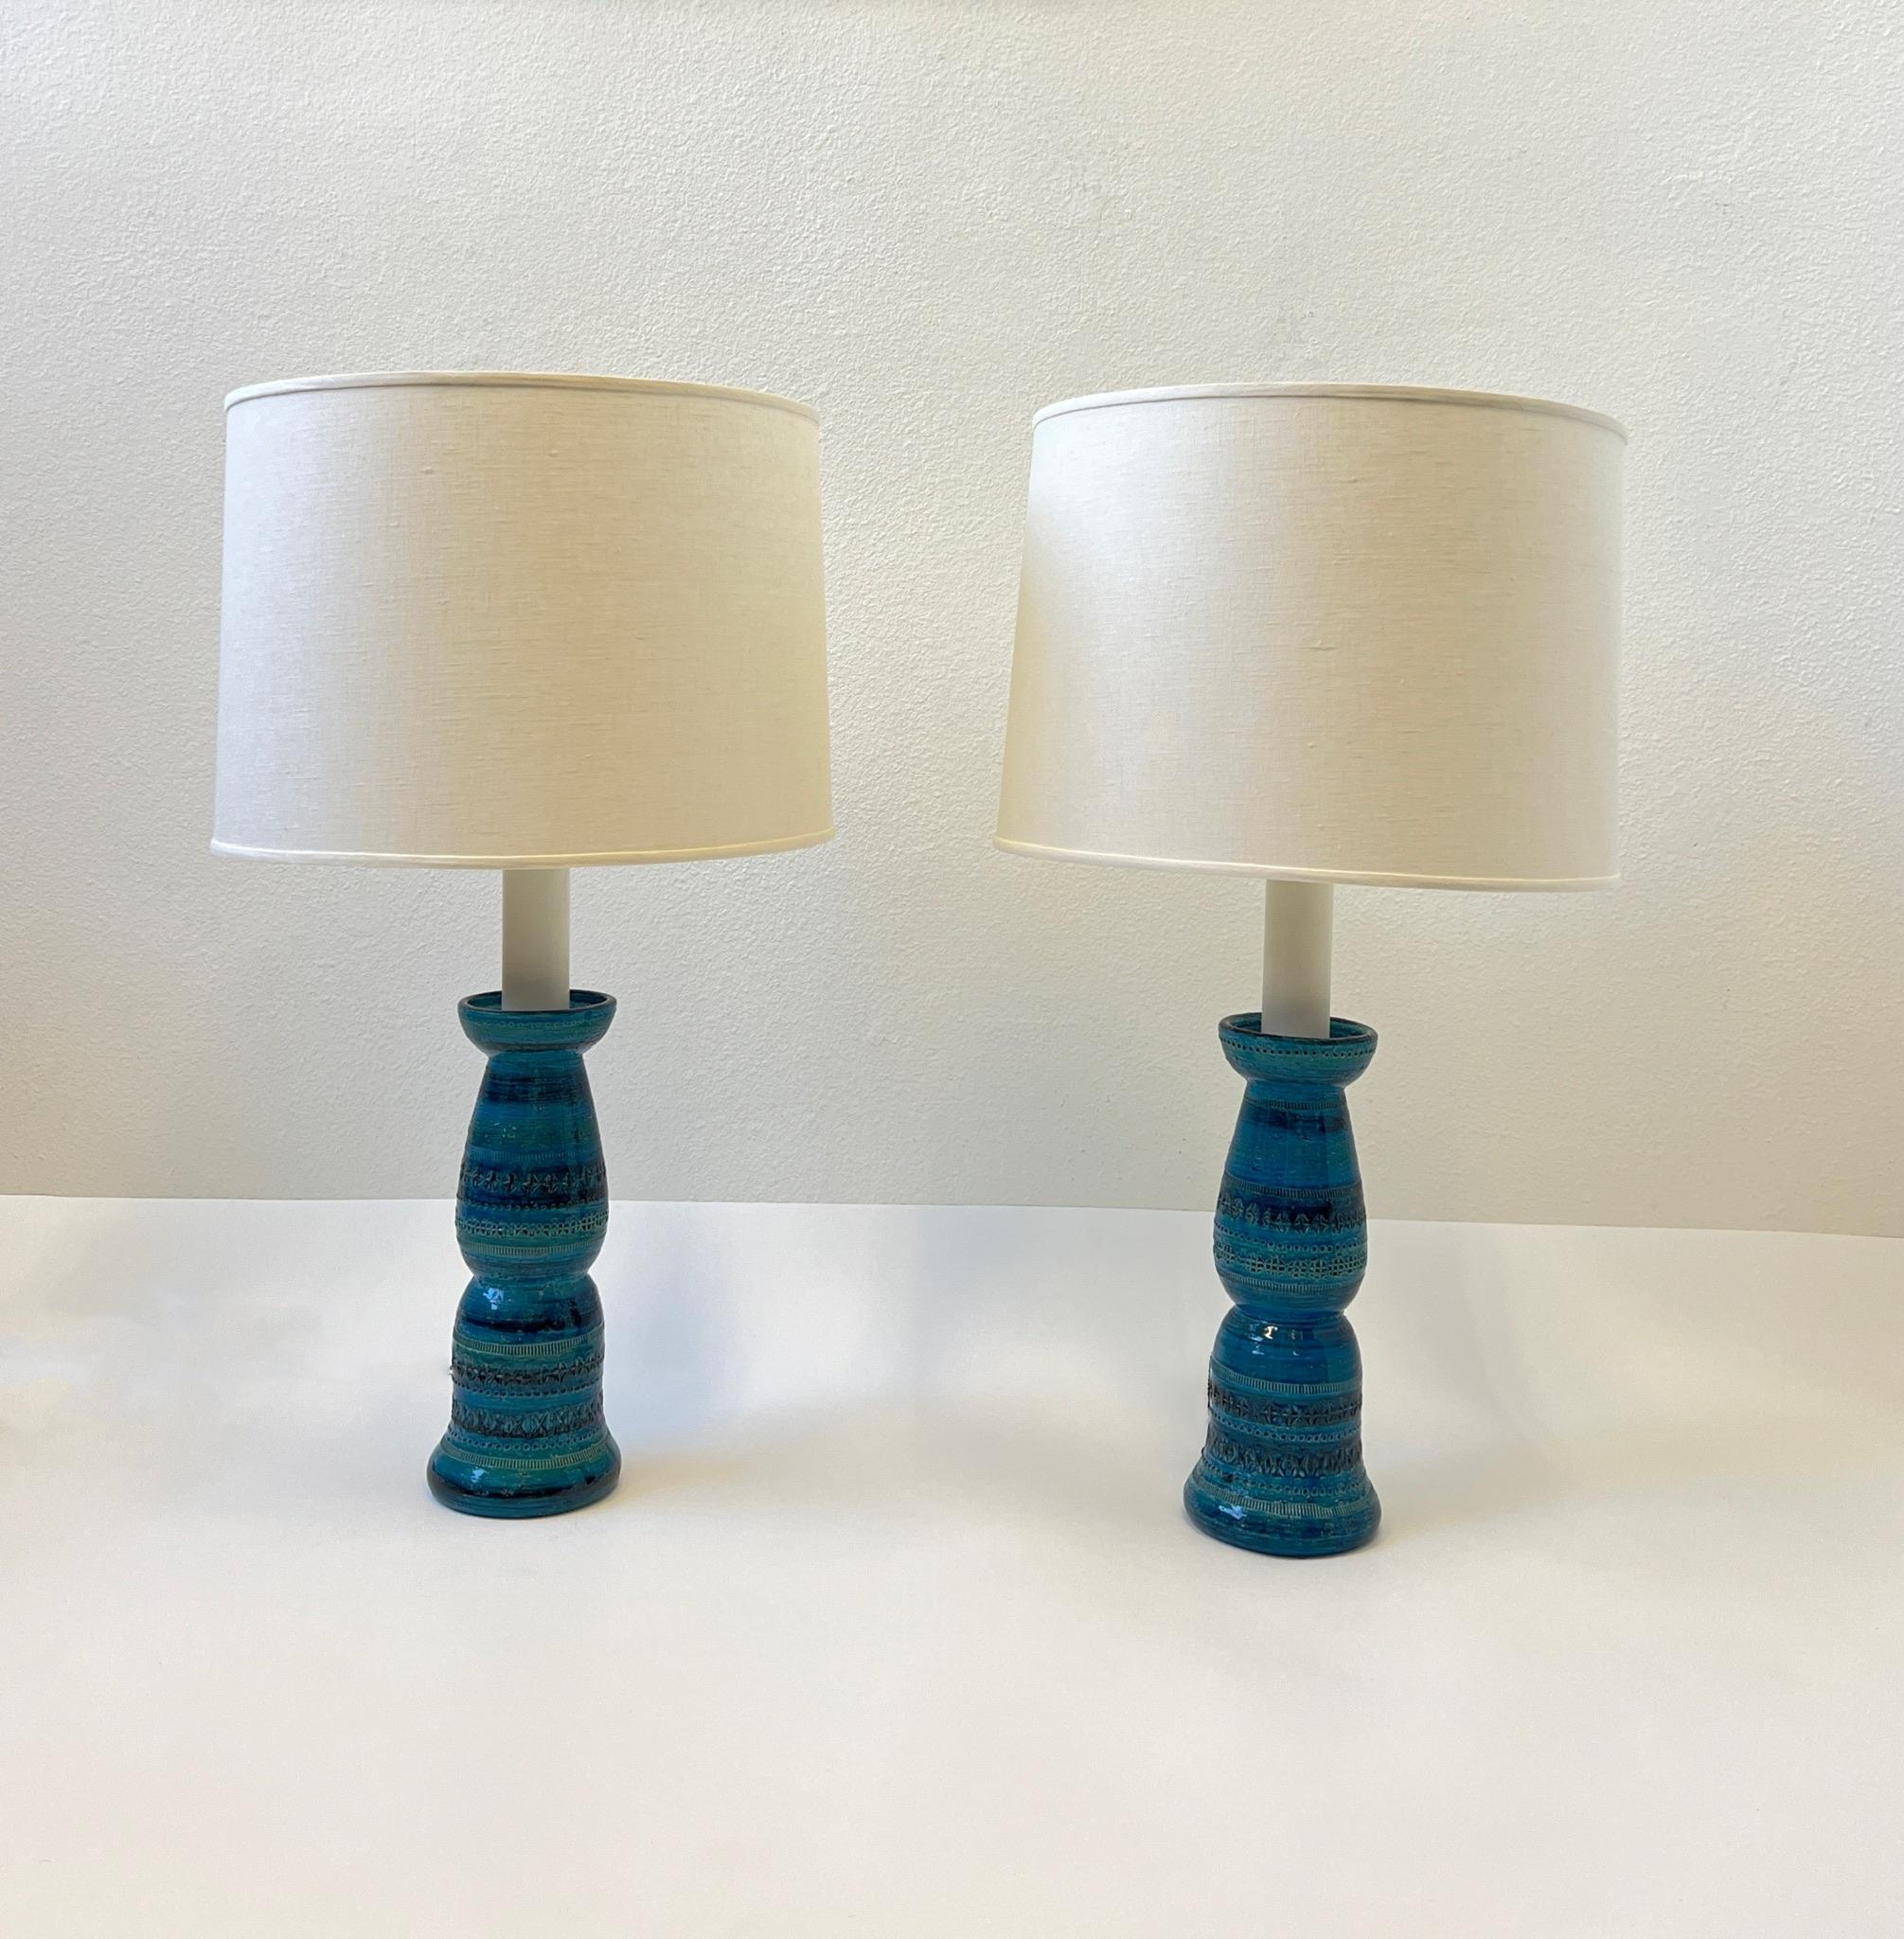 Glamorous pair of 1960’s Italian ceramic ‘Rimini Blue’ table lamps by renowned Italian ceramicist Aldo Londi for Bitossi. 
Newly rewired with new polish chrome hardware, black cloth cord and new vanilla linen shades. 
Measurements with shades: 18”